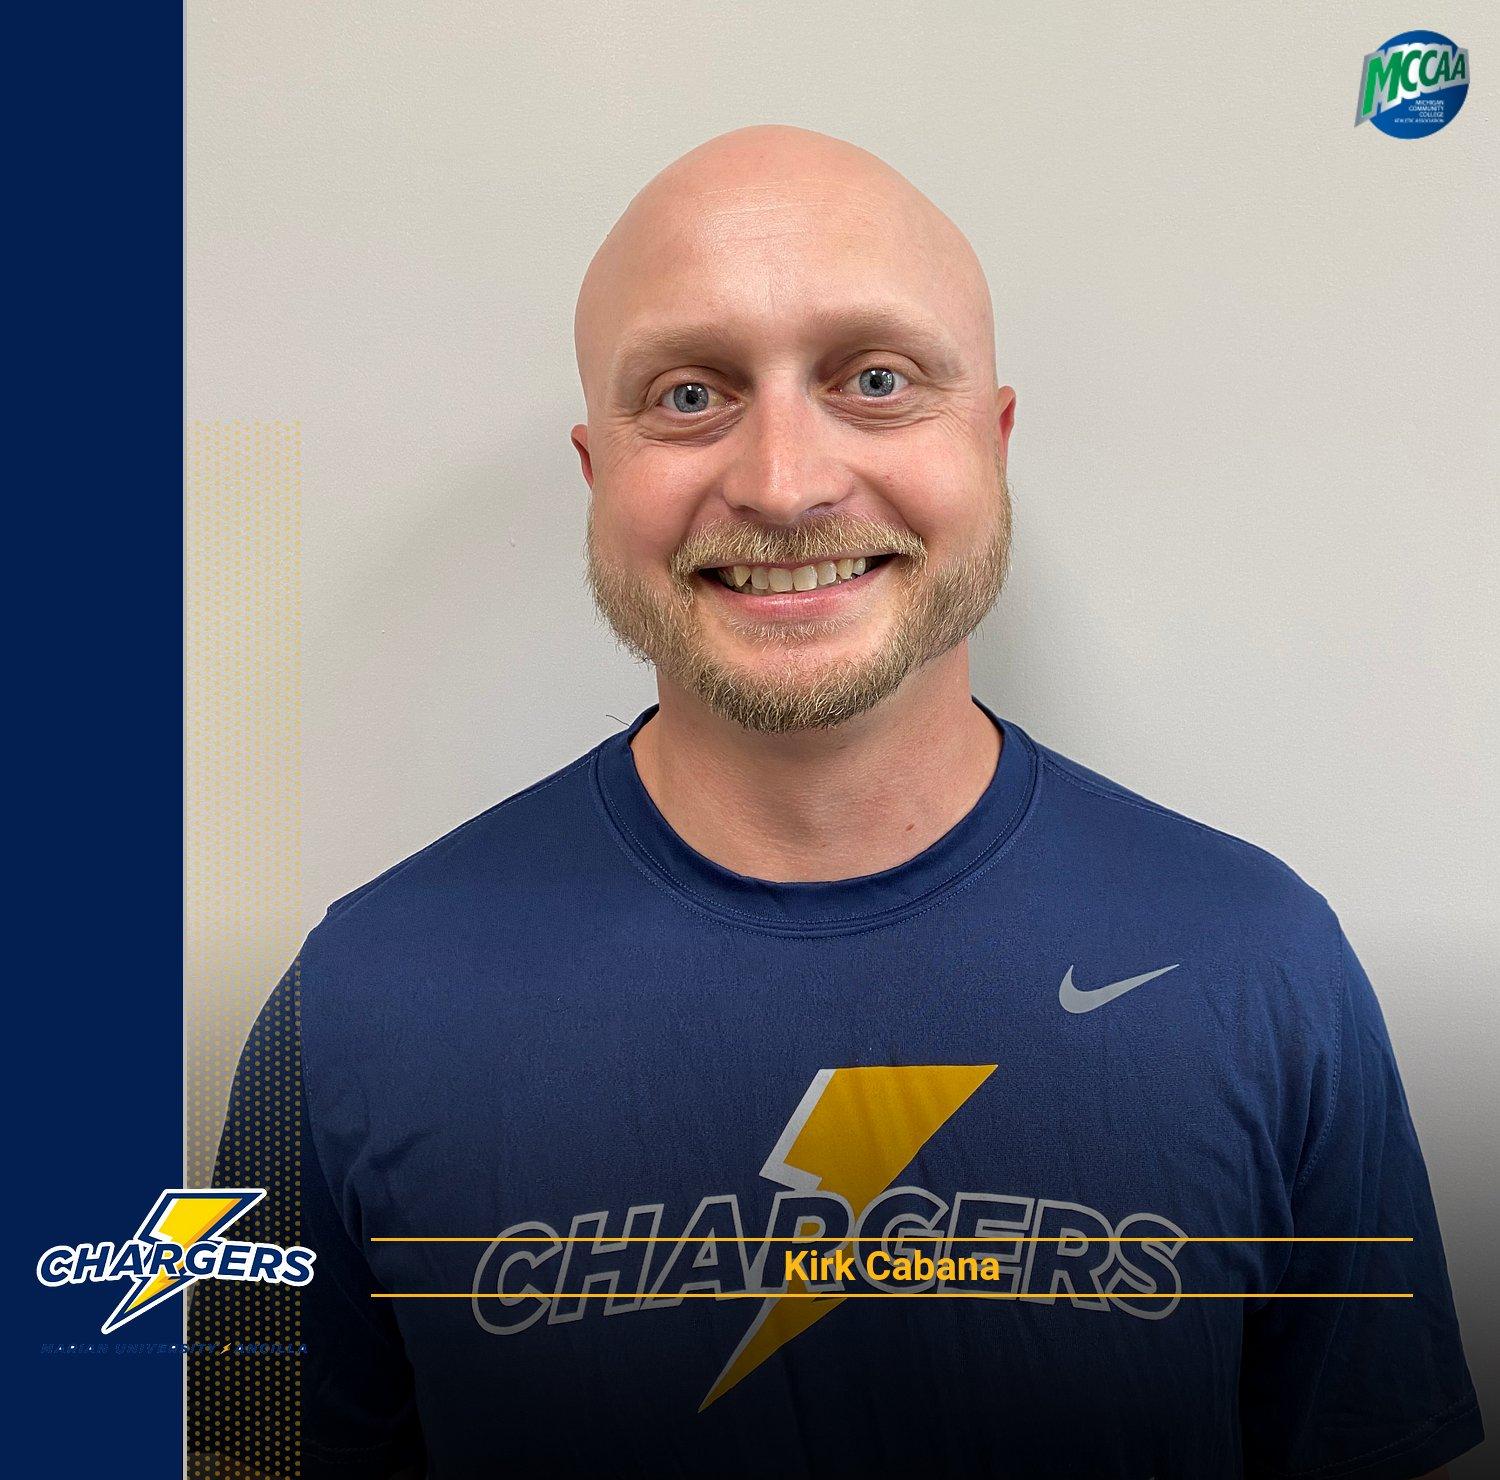 Kirk Cabana named as the new Head Baseball Coach for the Chargers